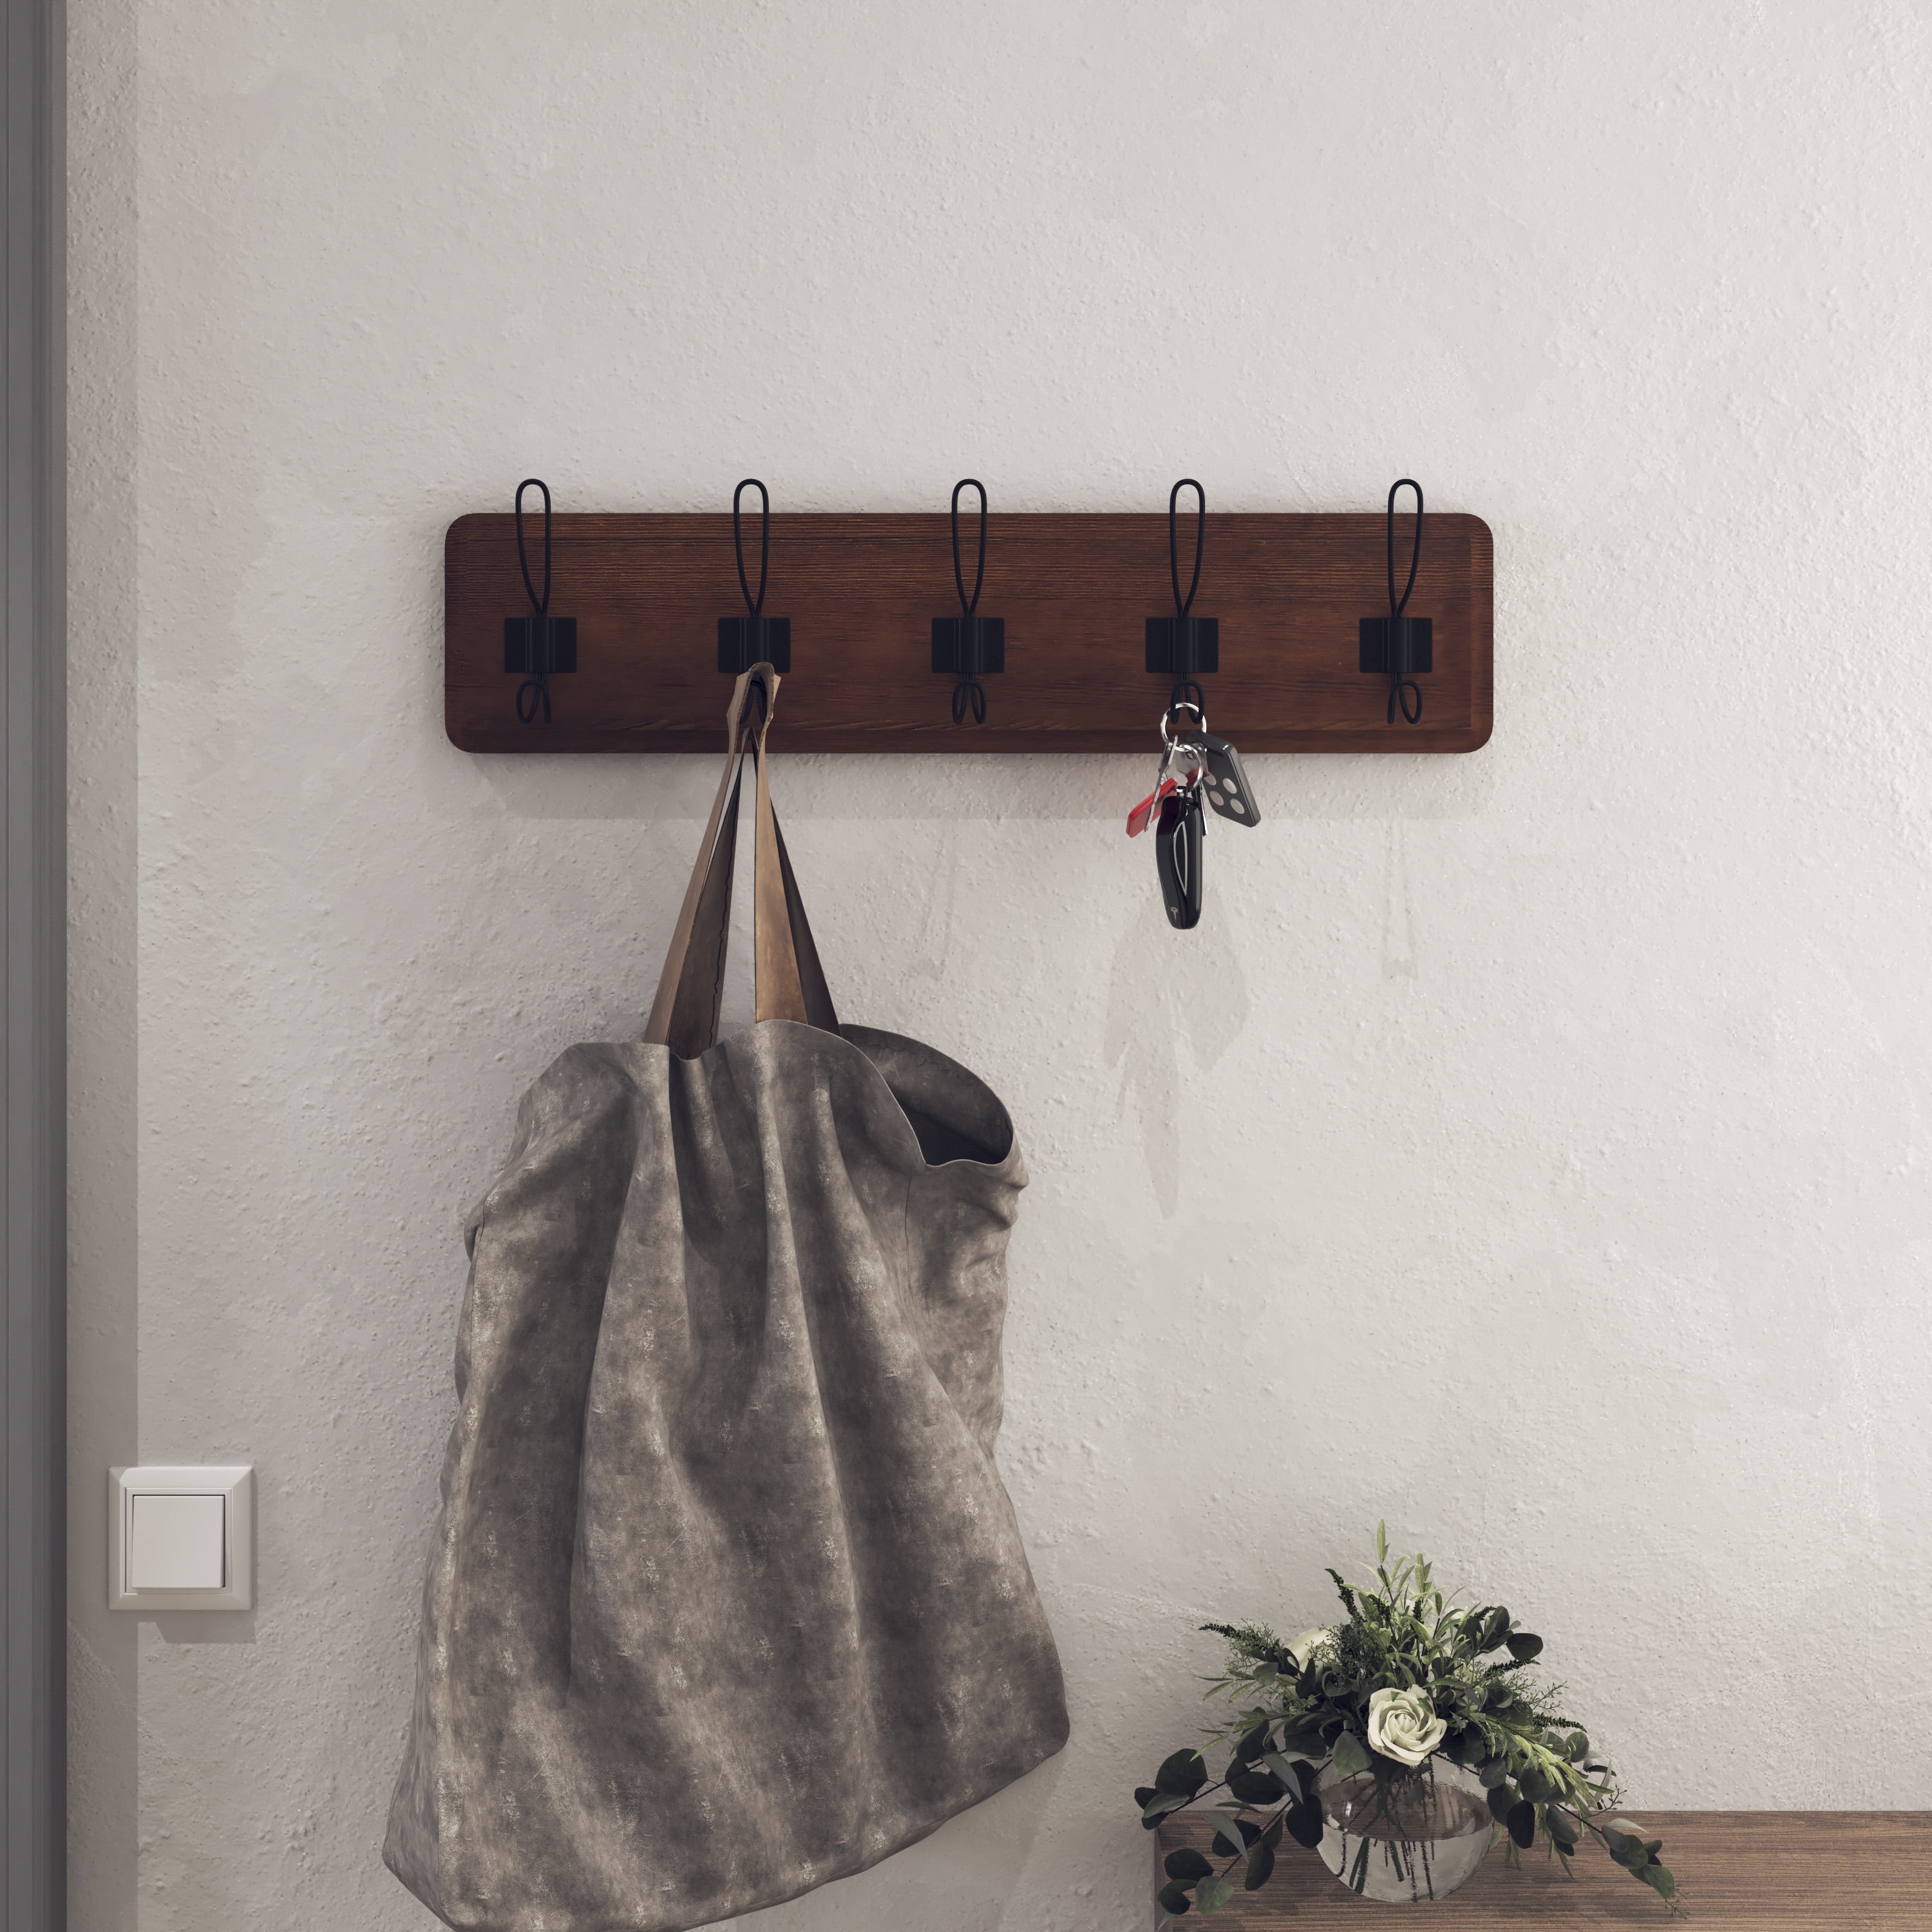 HBCY Creations Wall Mounted Shelf with Coat Hooks and Baskets, Solid Wood  Entryway Organizer Wall Shelf with Hooks - Hang Coats, Keys or Coffee Mugs